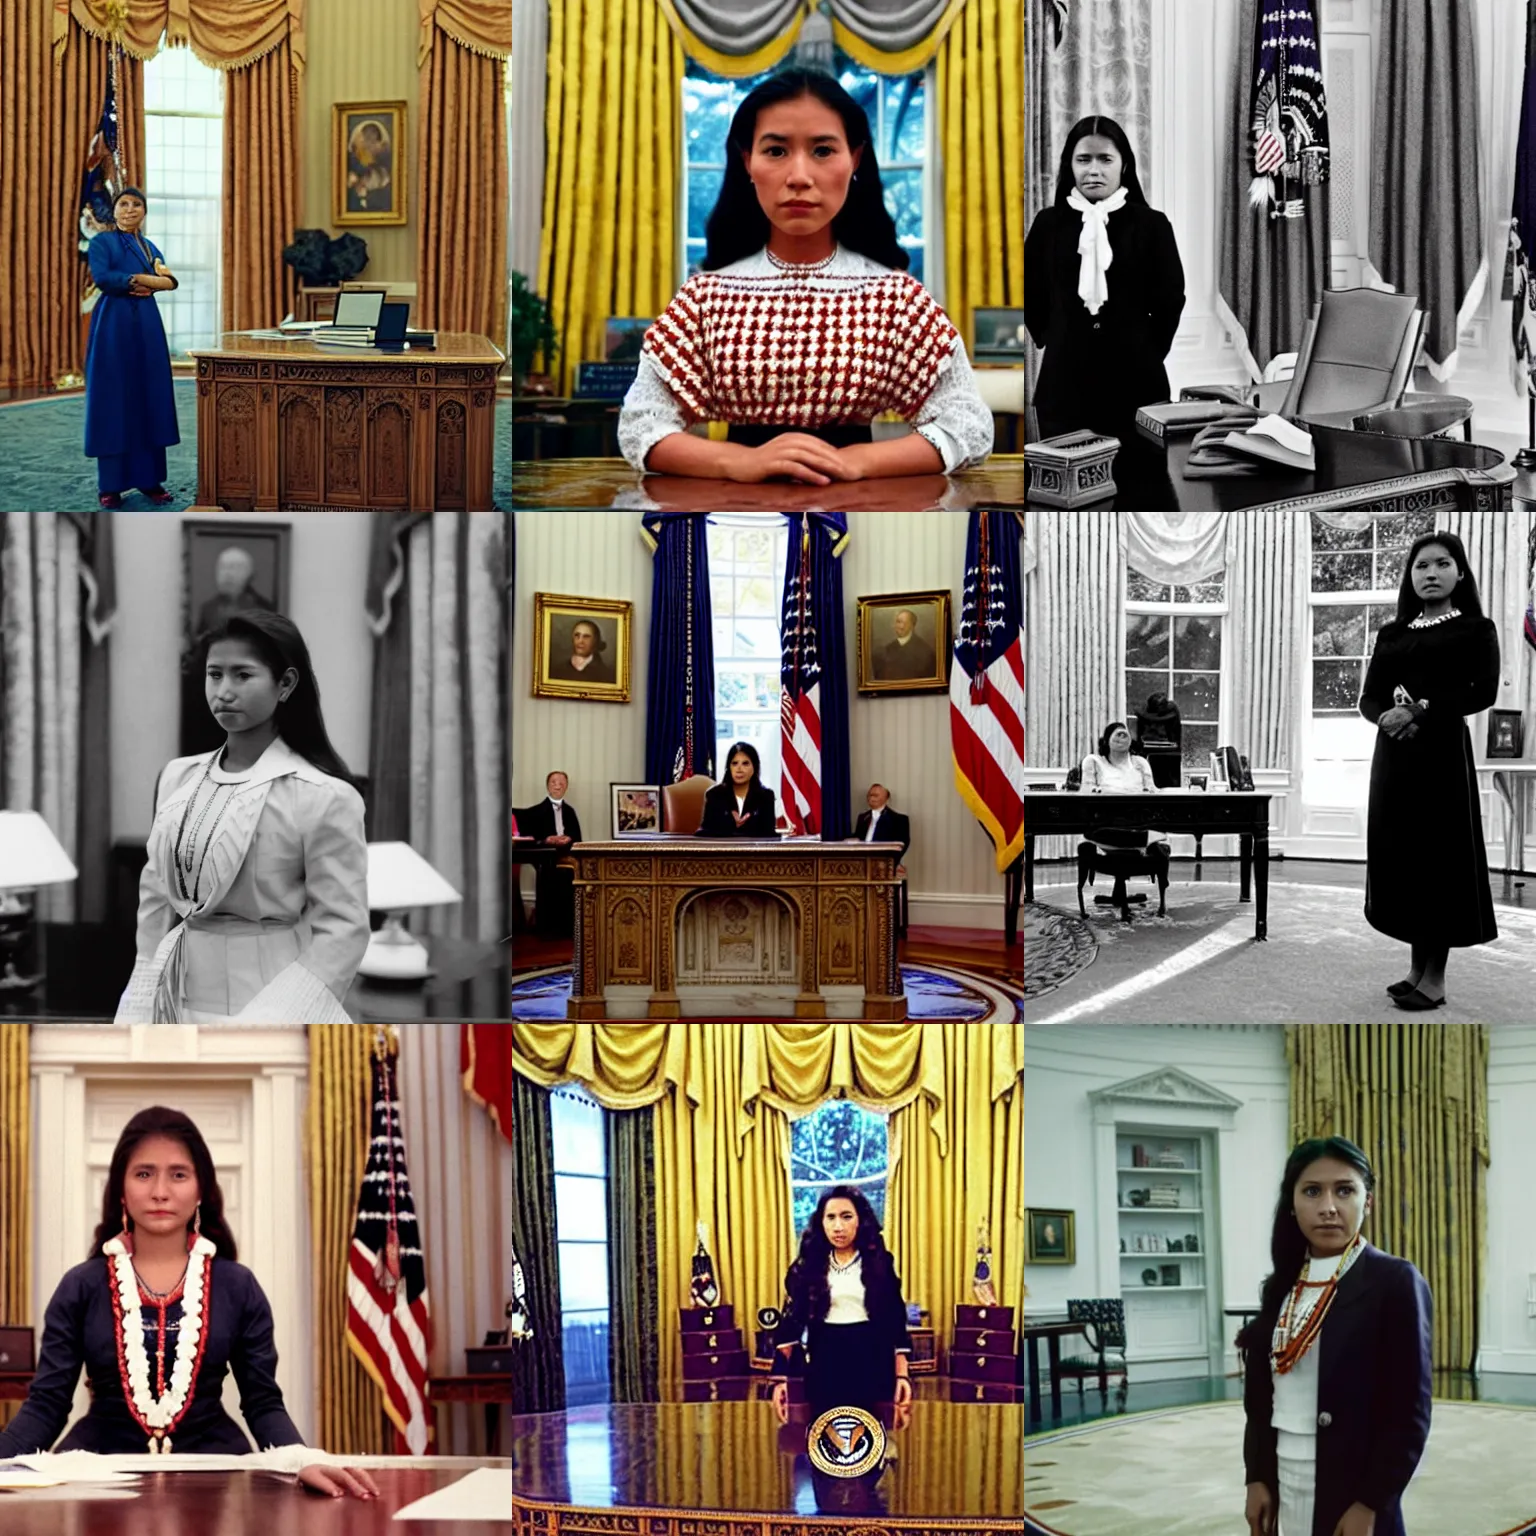 Prompt: Film still, long shot of a young Mayan woman as president of the United States, standing in the Oval Office, promotional image